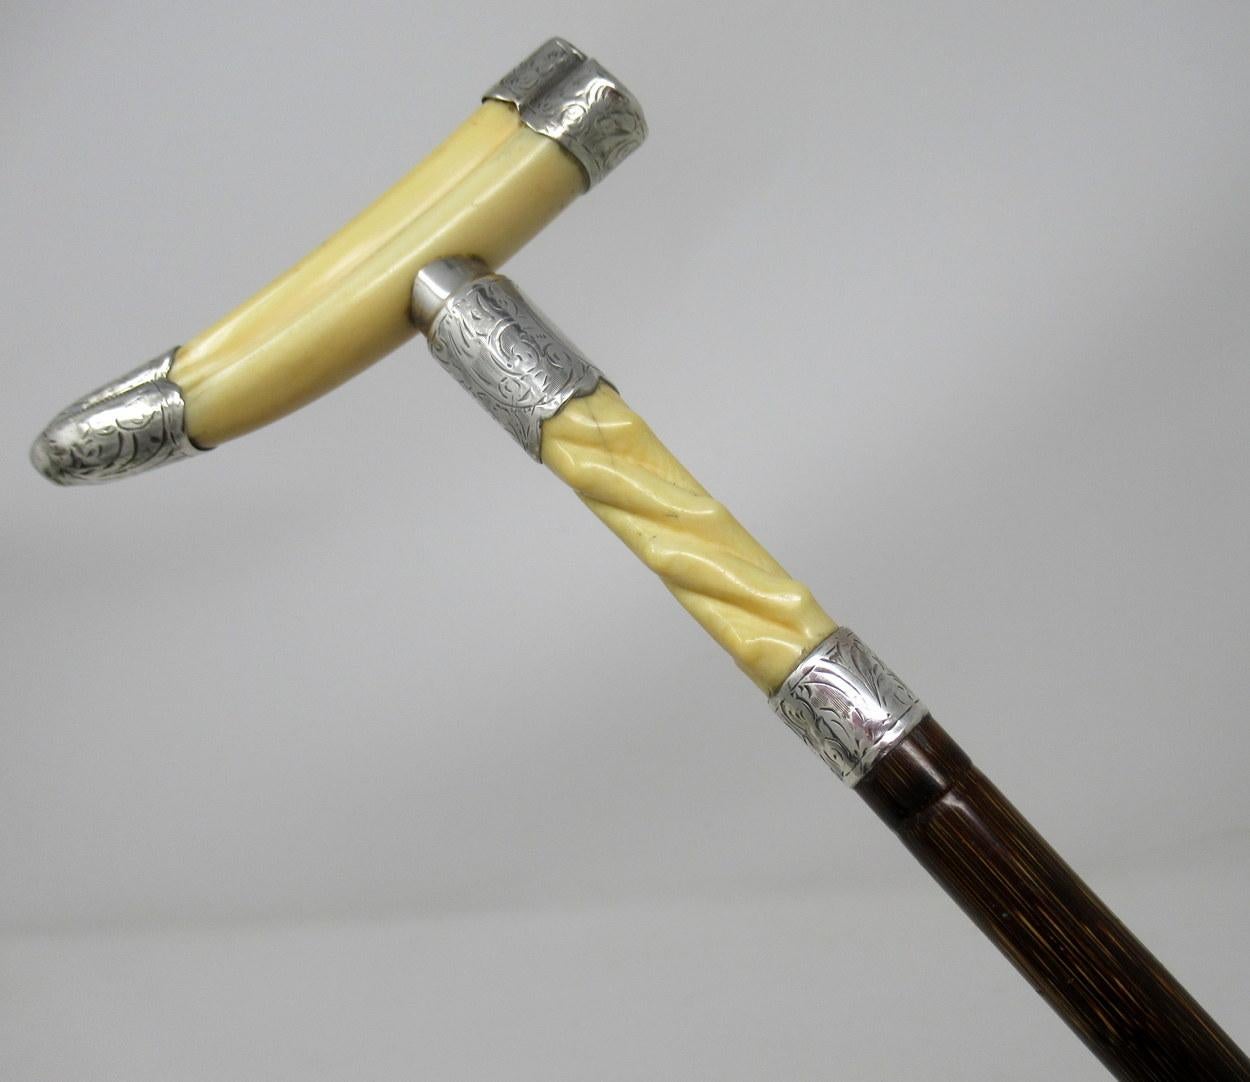 A very unusual ladies or gentleman’s ivory boar tusk walking cane, early 20th century, of outstanding quality.

The 